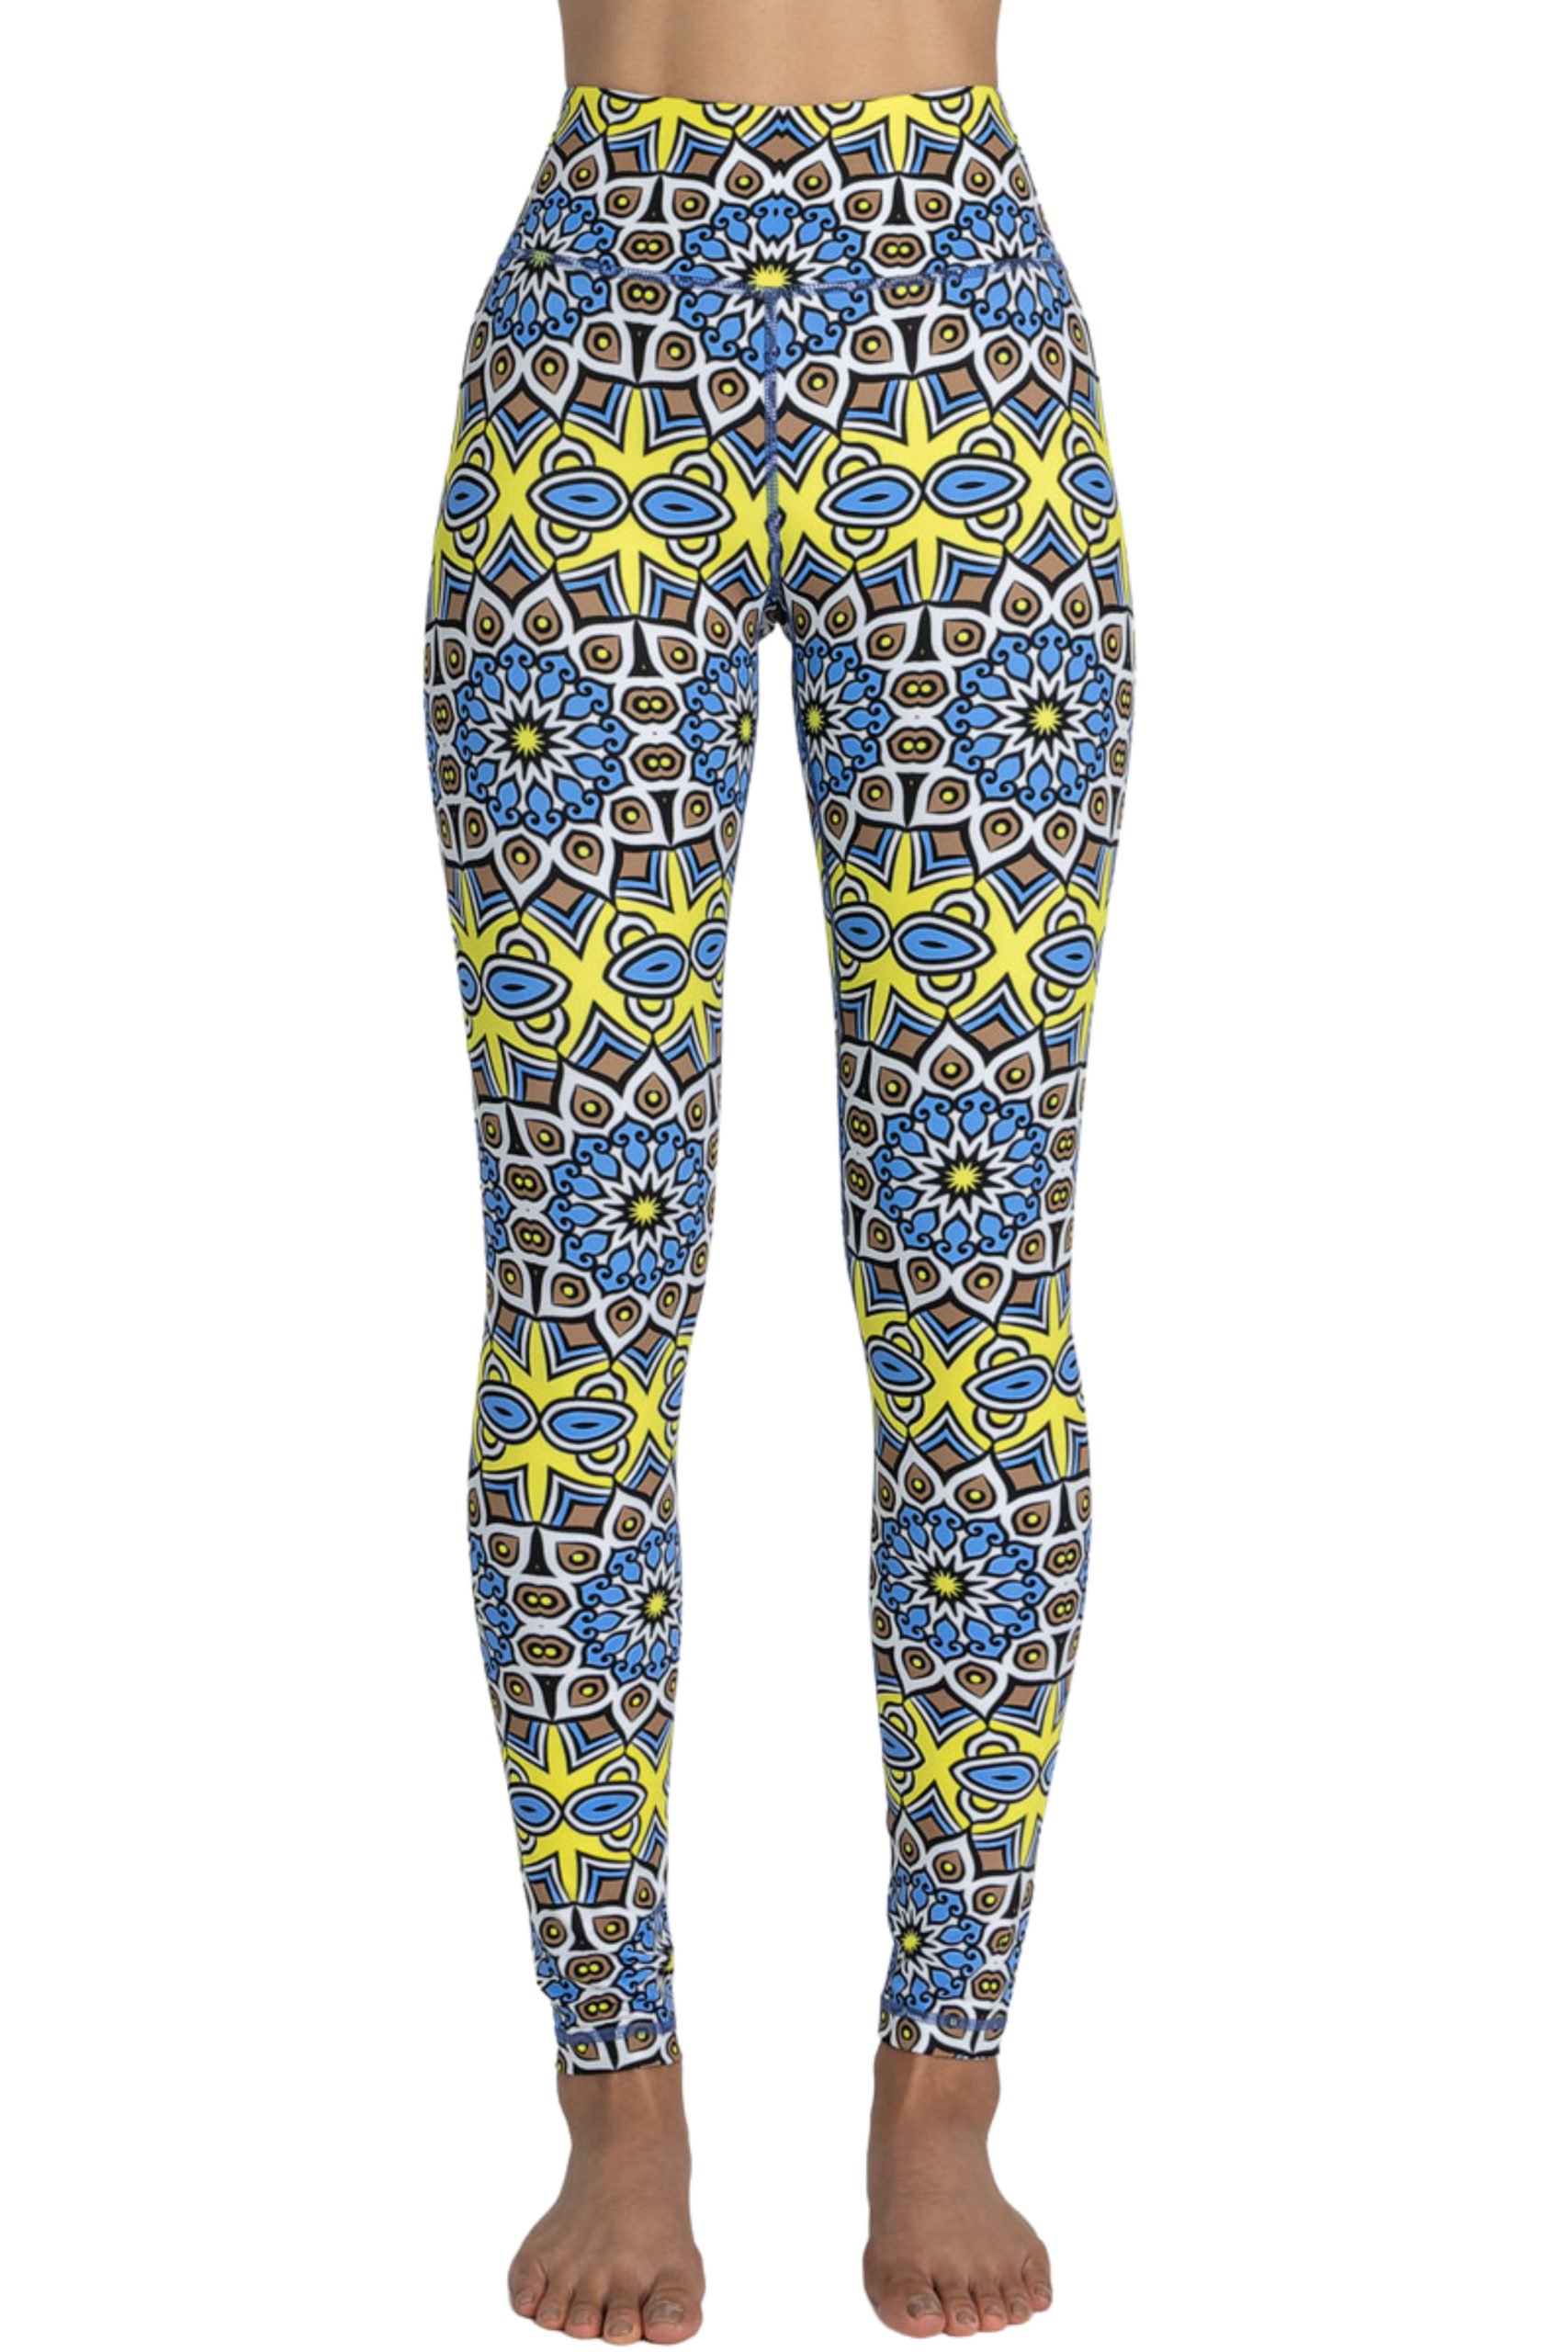 Mandala Chakra Legging and Hollow Out Tank Top Set Outfit For Women Summer  Sport Yoga Suit Plus Size - AliExpress